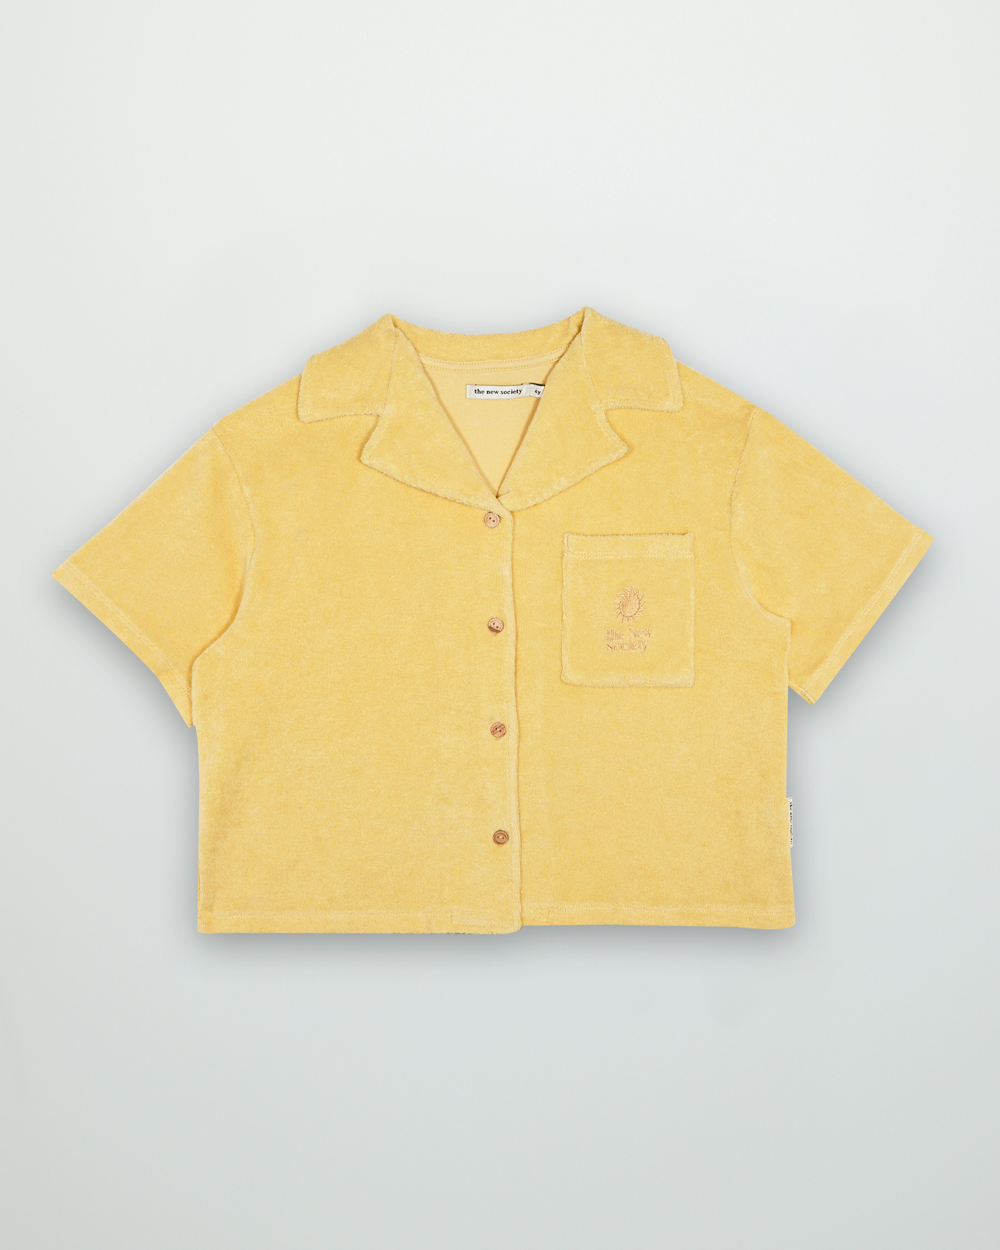 [THE NEW SOCIETY ] Nicclo Shirt Cannuccia [4Y]